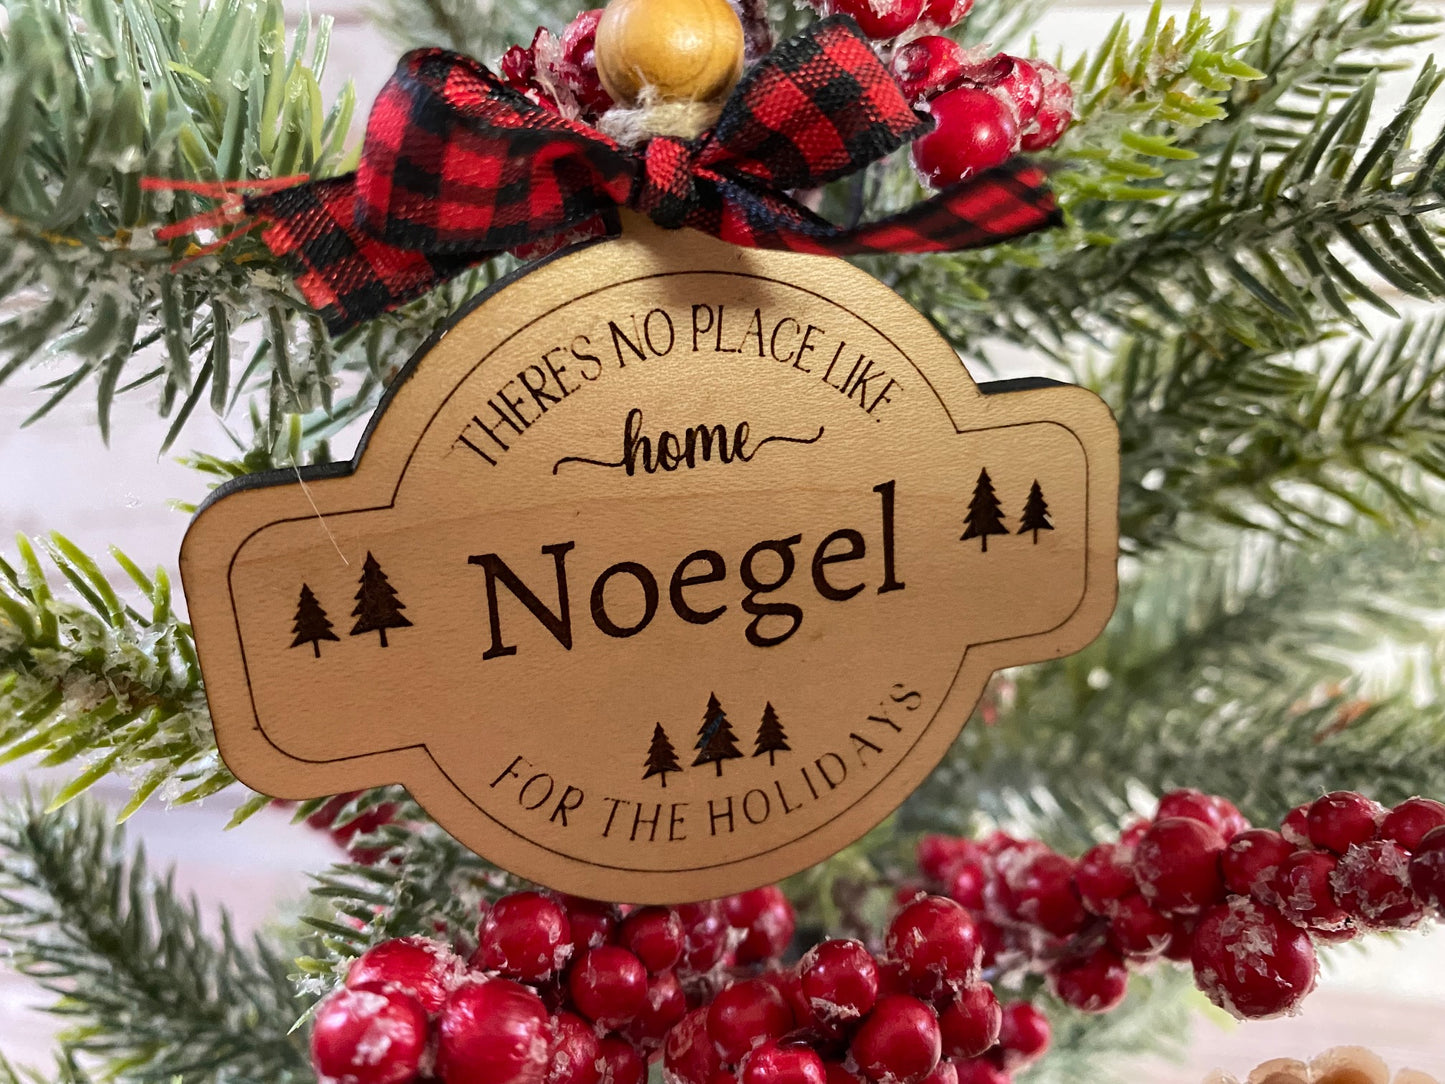 Personalized "There's No Place Like Home for the Holidays" Ornament with pine trees